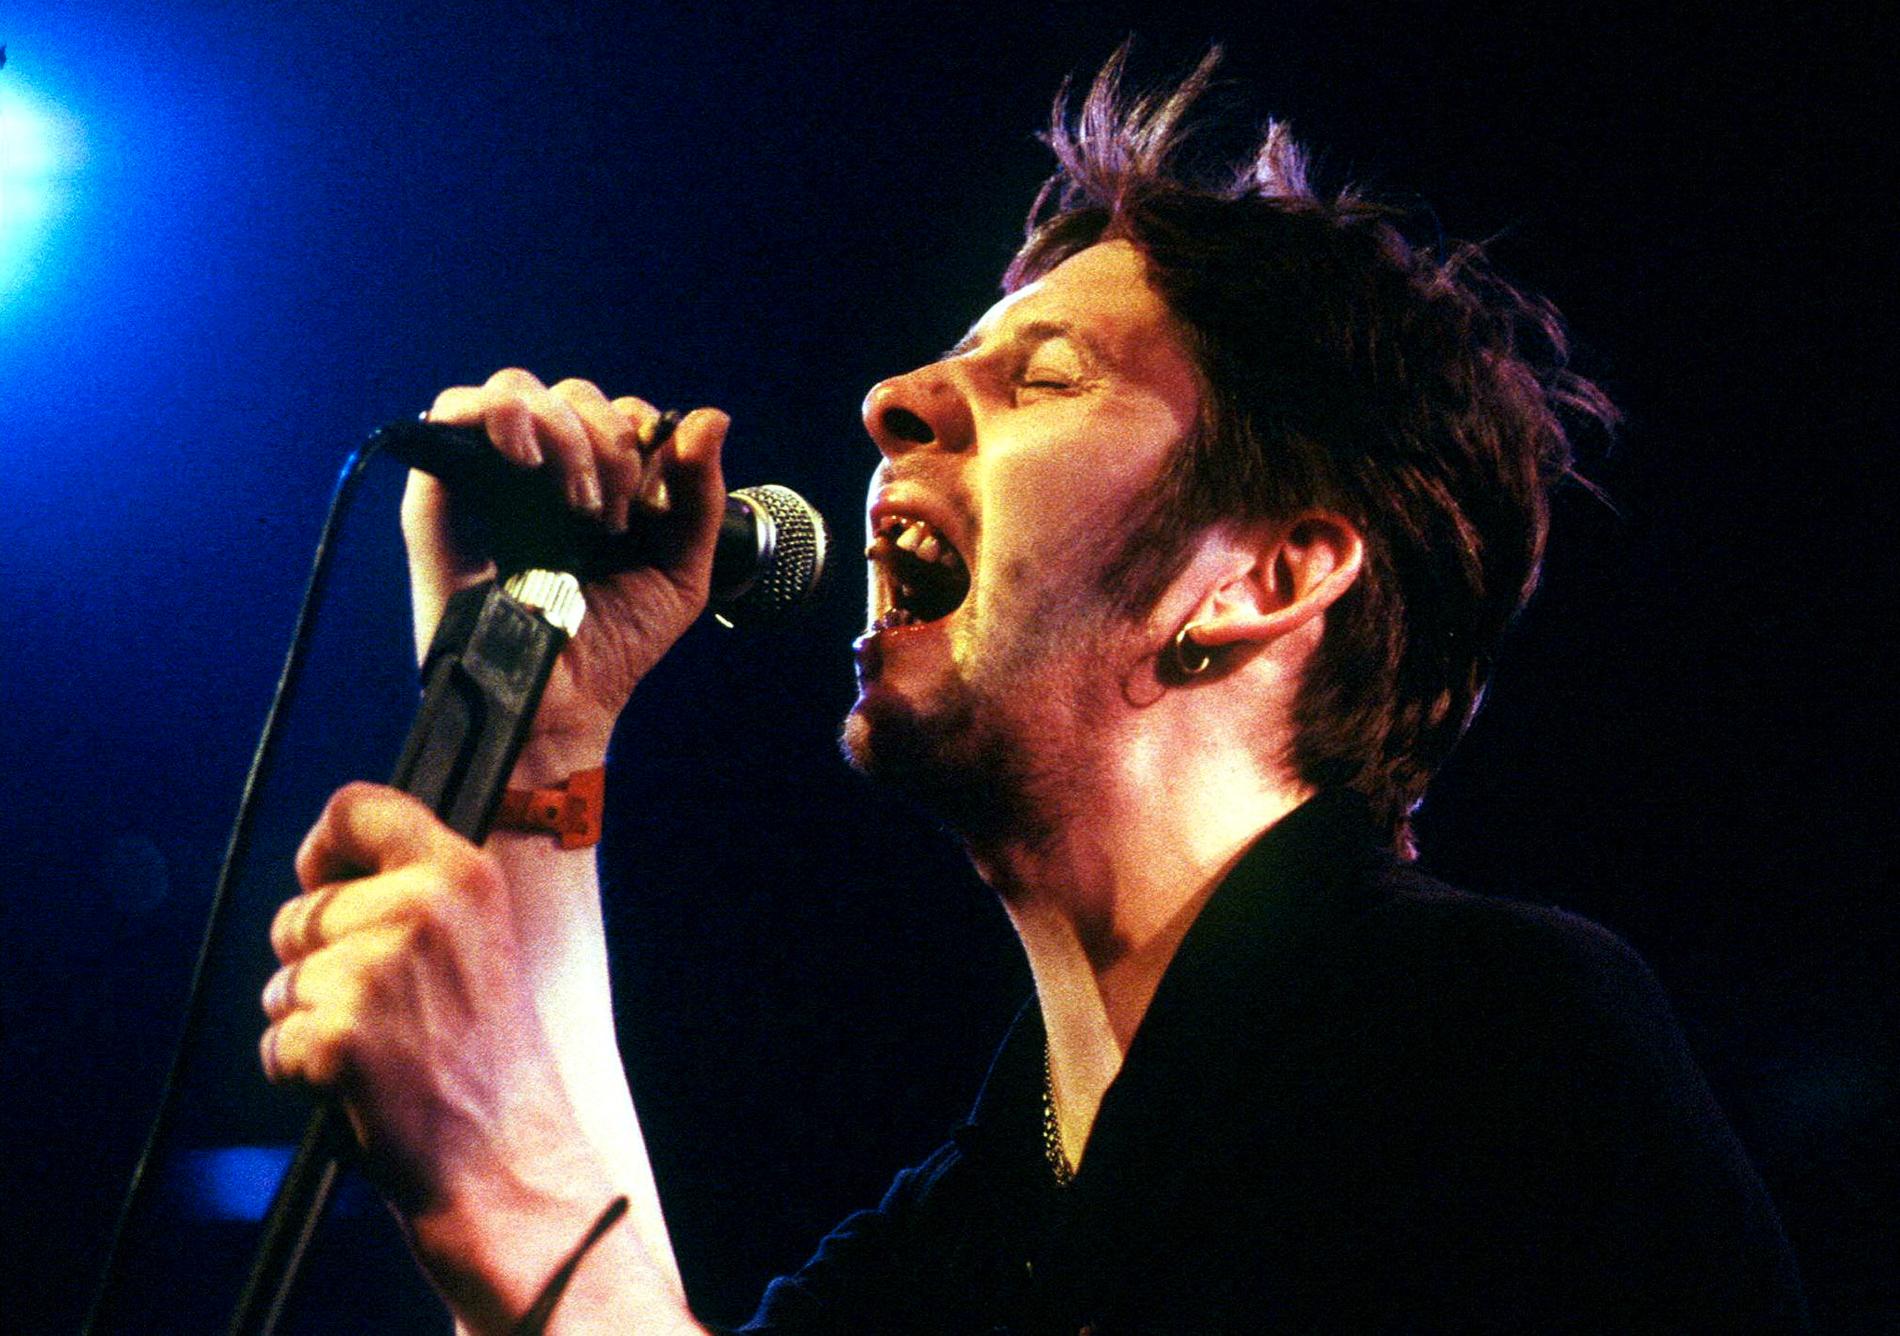 The legend: Shane MacGowan, here on stage in 1995.